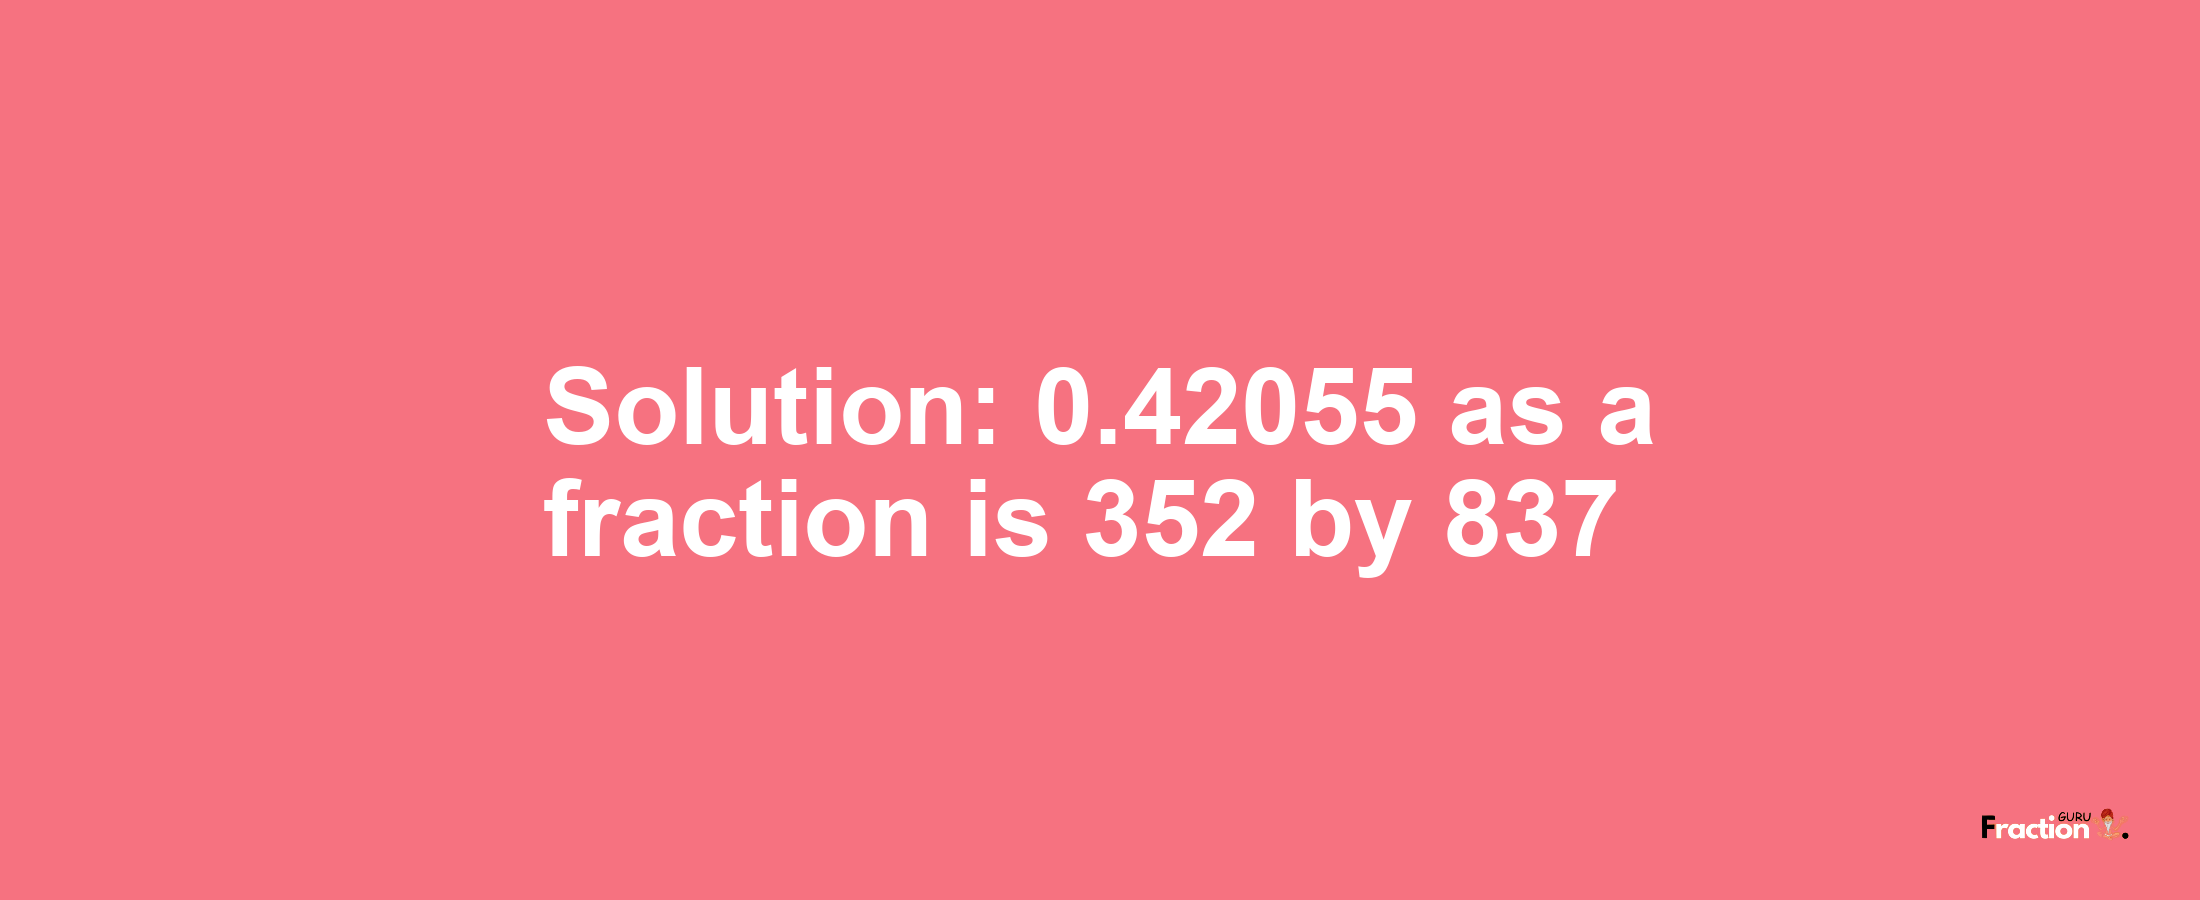 Solution:0.42055 as a fraction is 352/837